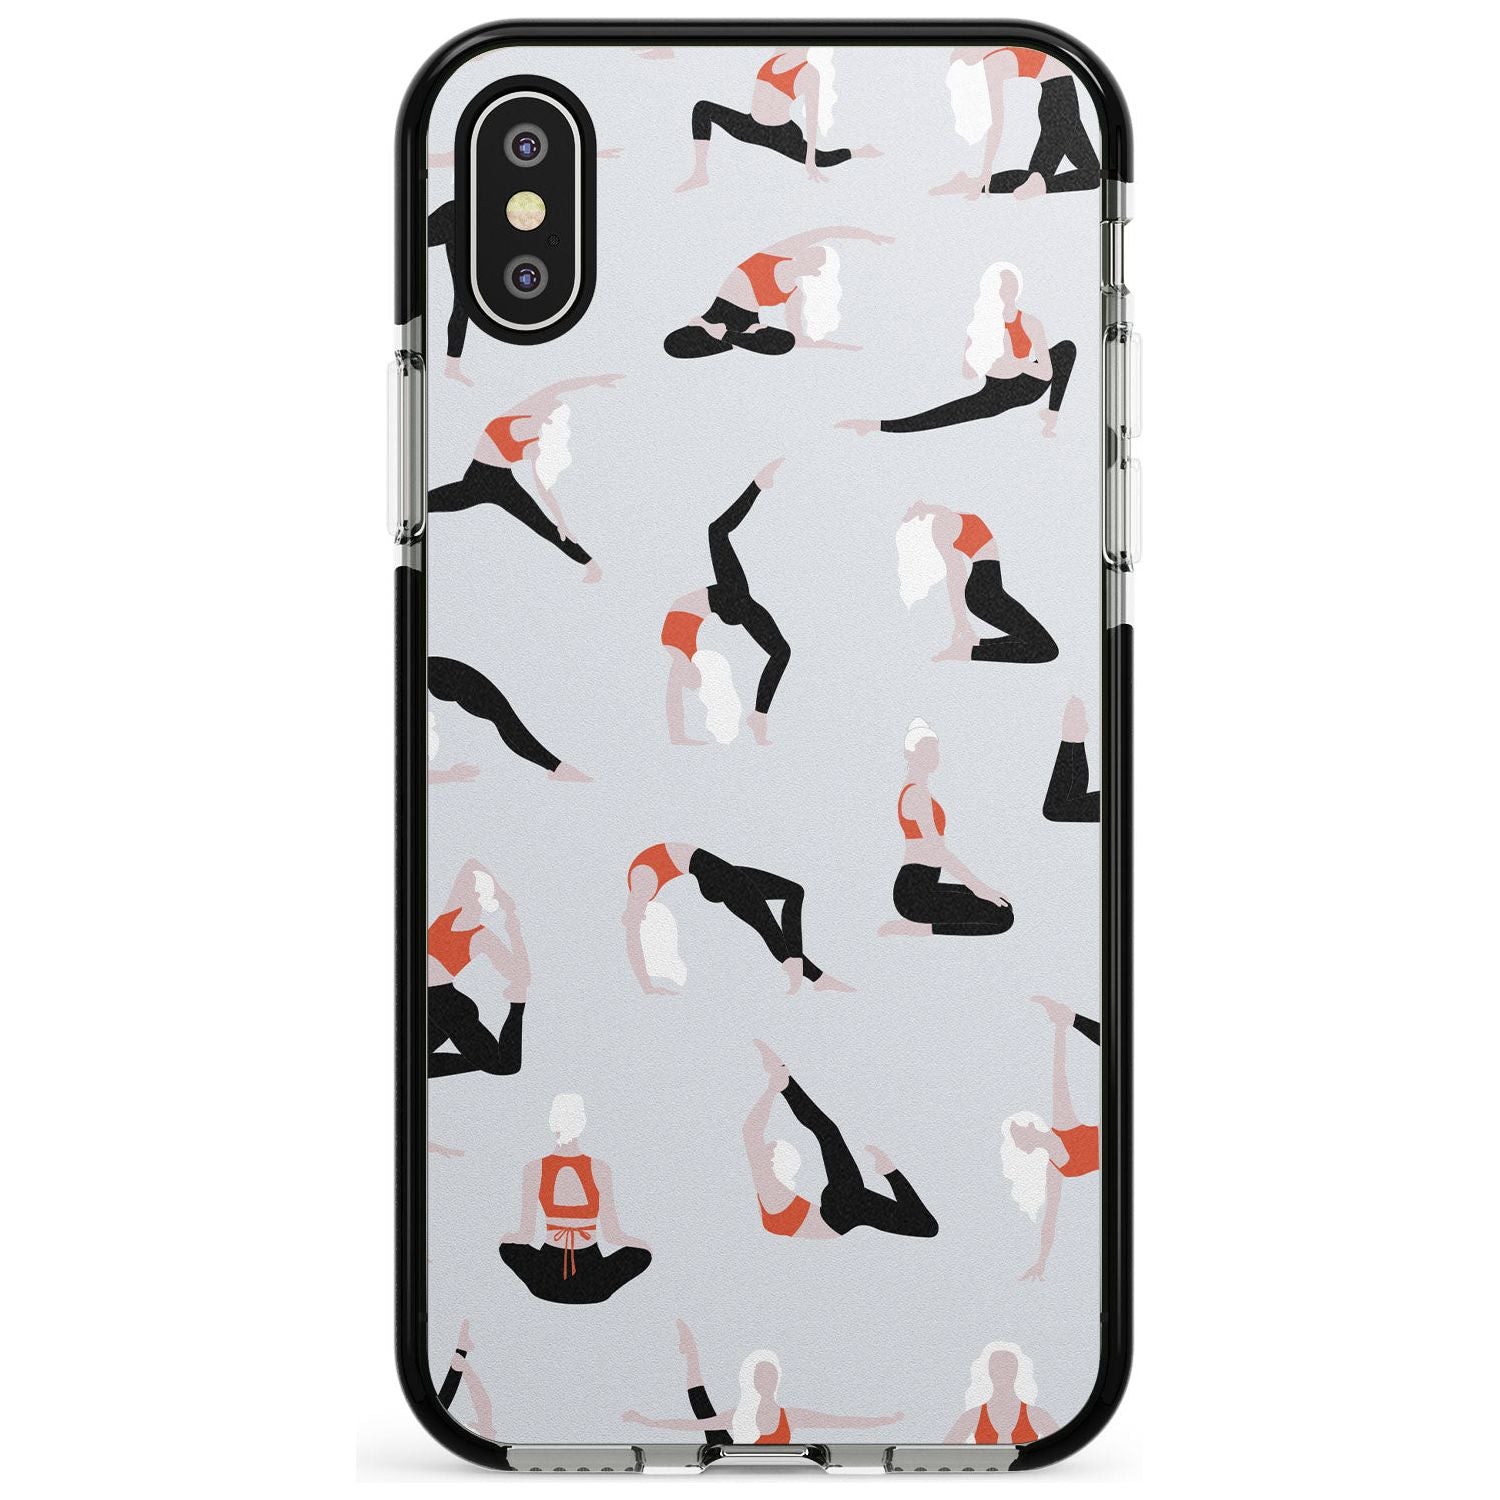 Yoga Poses Pink Fade Impact Phone Case for iPhone X XS Max XR